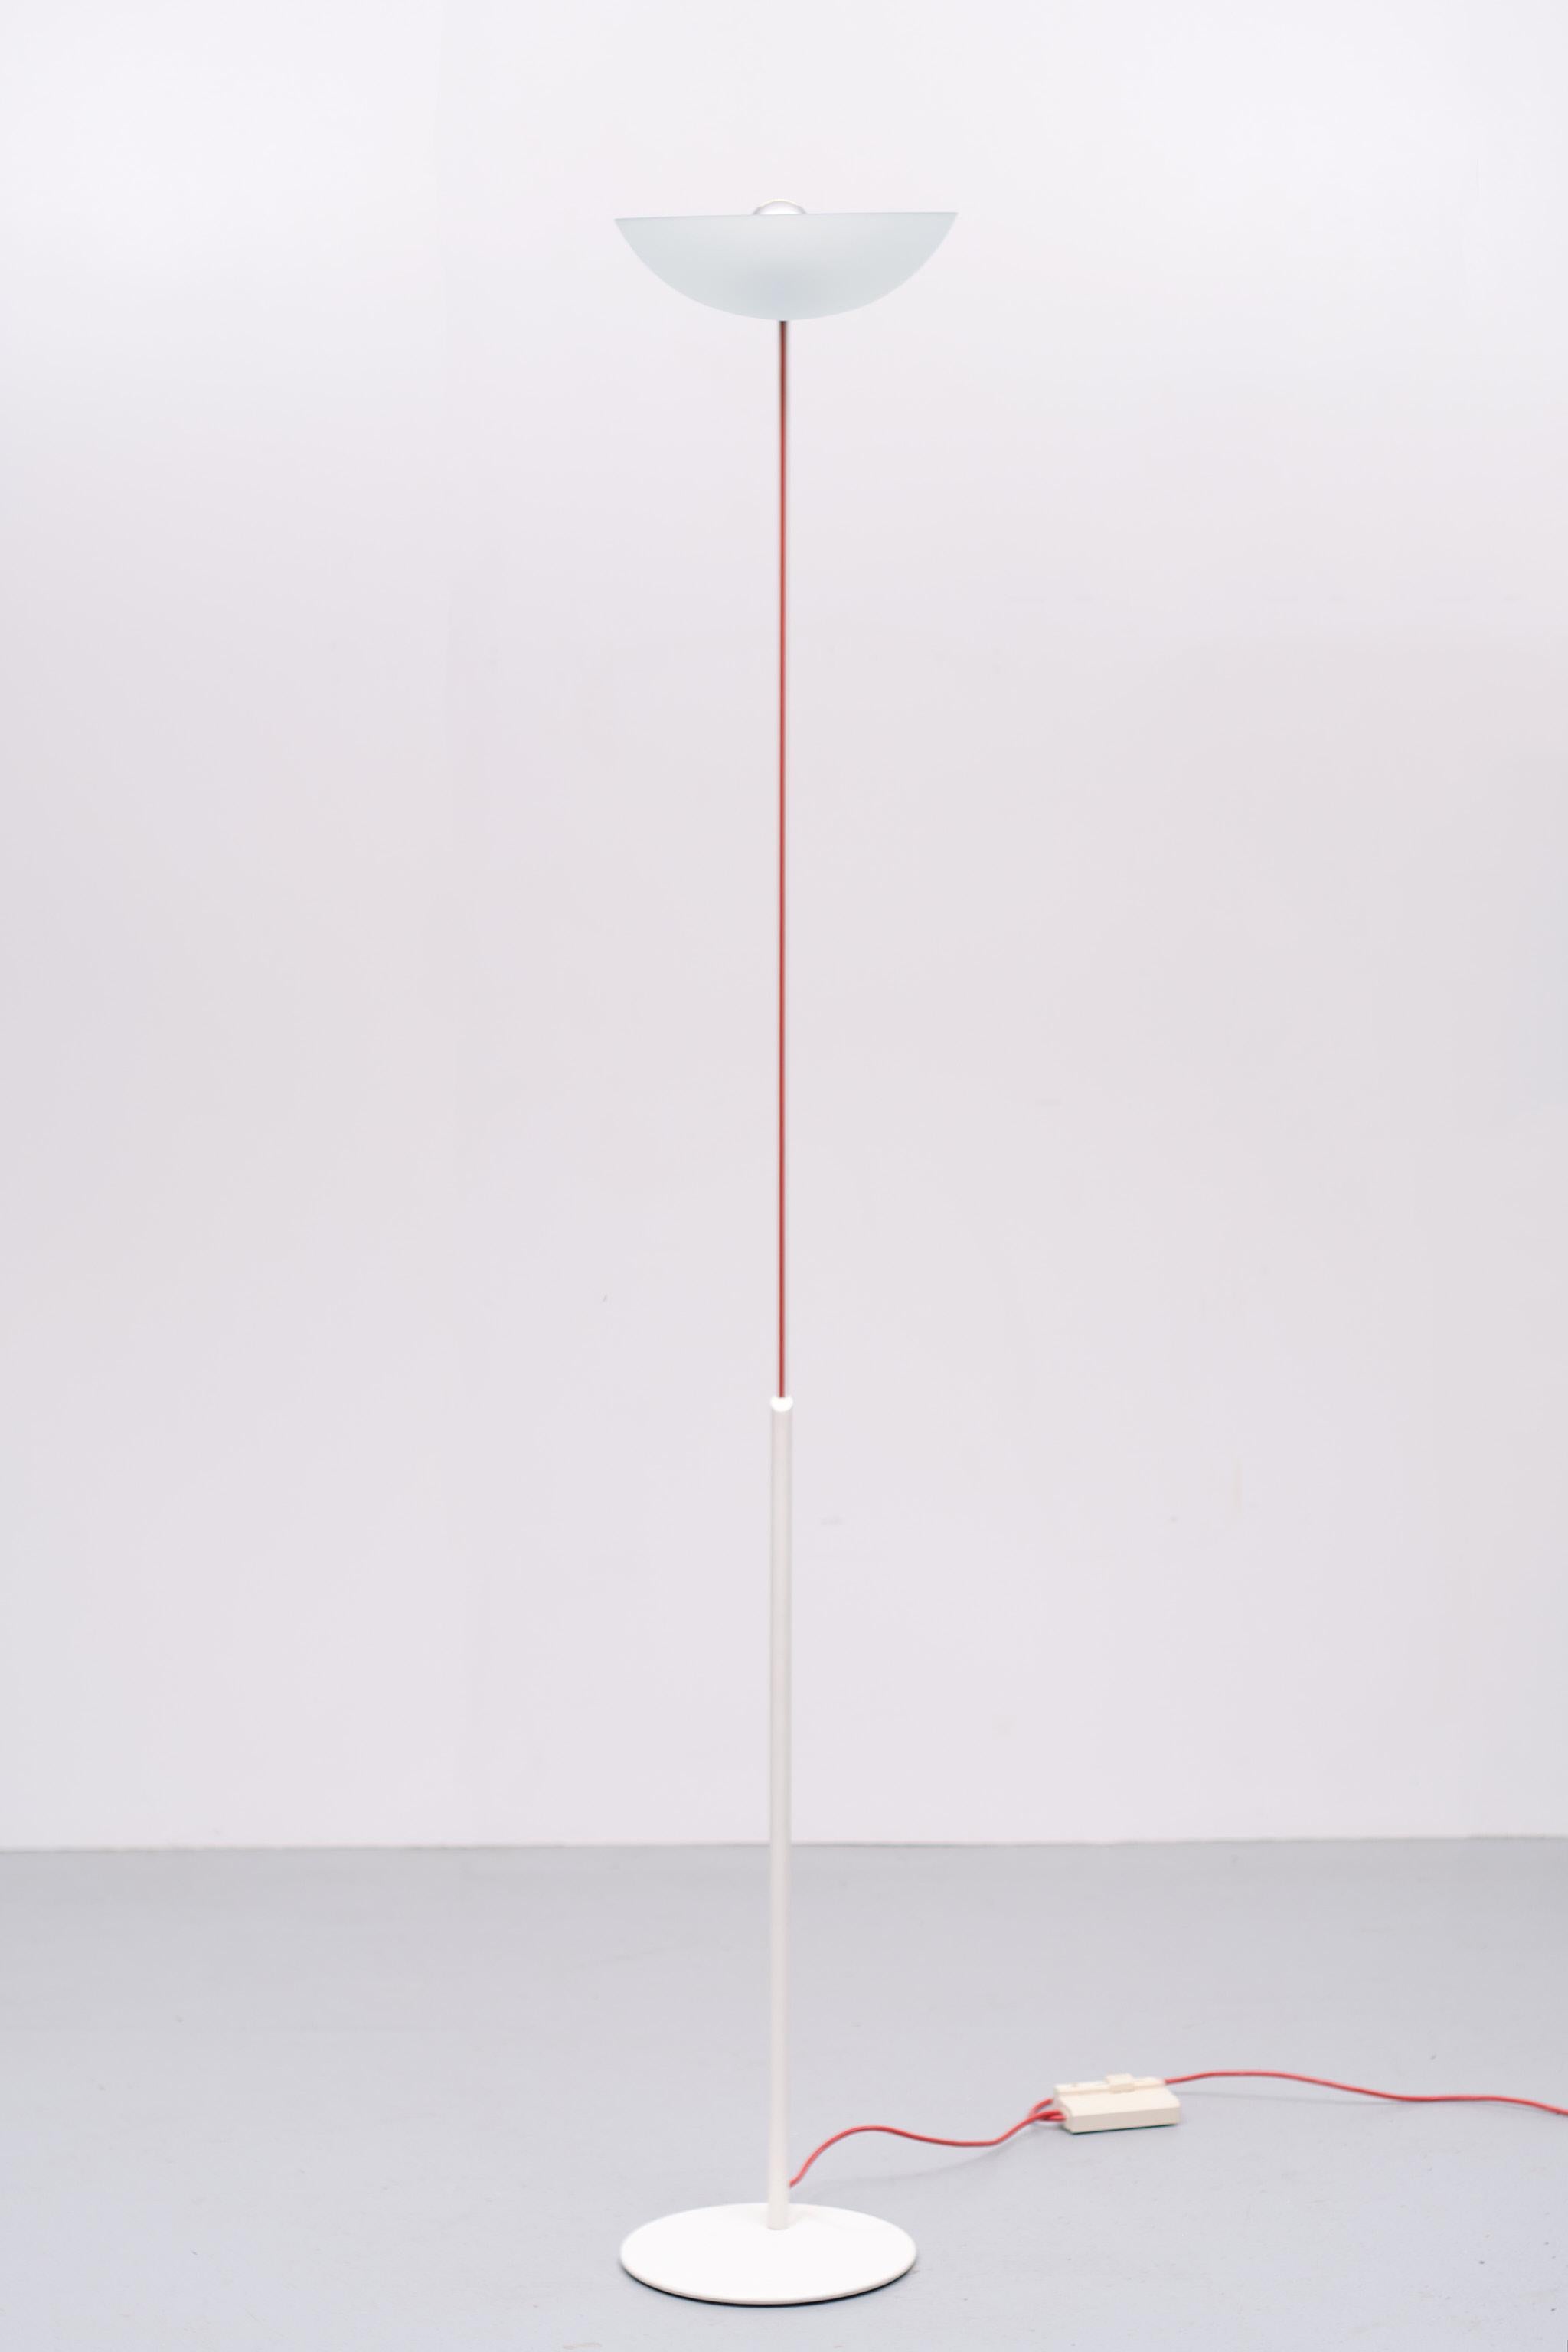 Very nice sleek Postmodern Italian floor lamp. High gloss White Metal upright 
comes with a Glass scale shade. The Red power cord is a nice detail.
rare find. Signed. One E27 bulb needed. working dimmer. Very good condition.